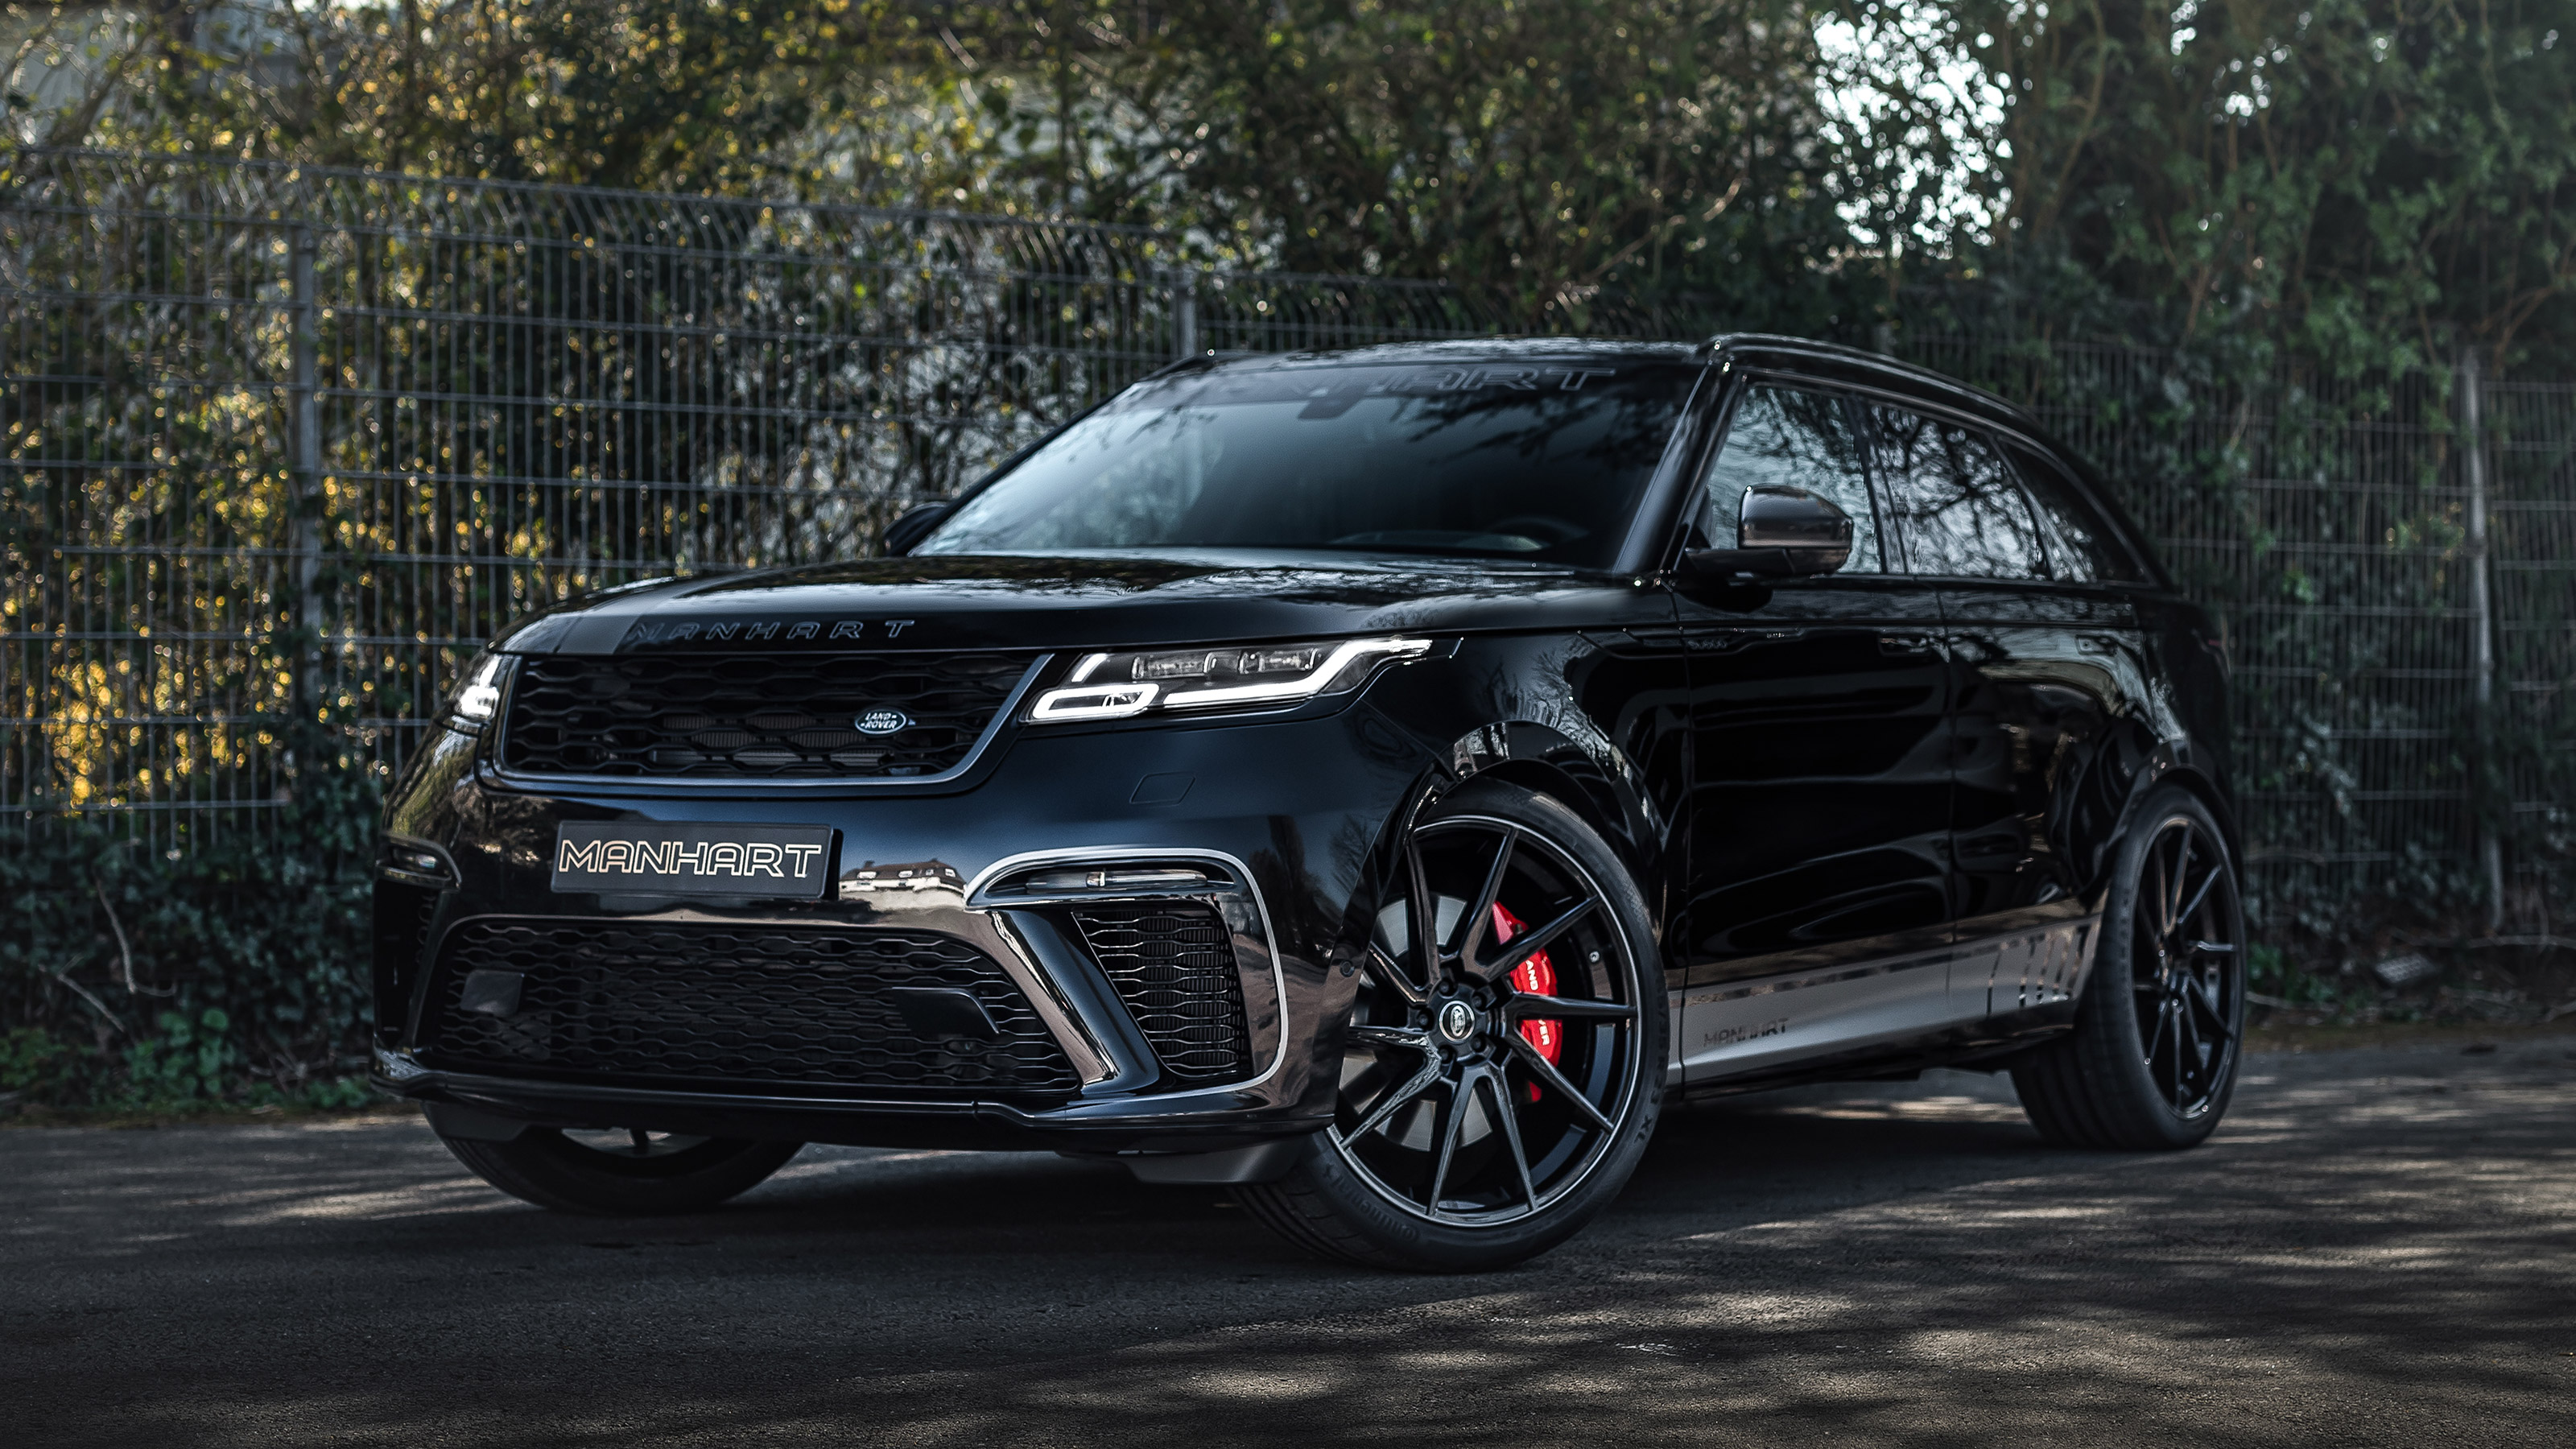  Range  Rover  Velar  SV Autobiography tuned to 592bhp by 